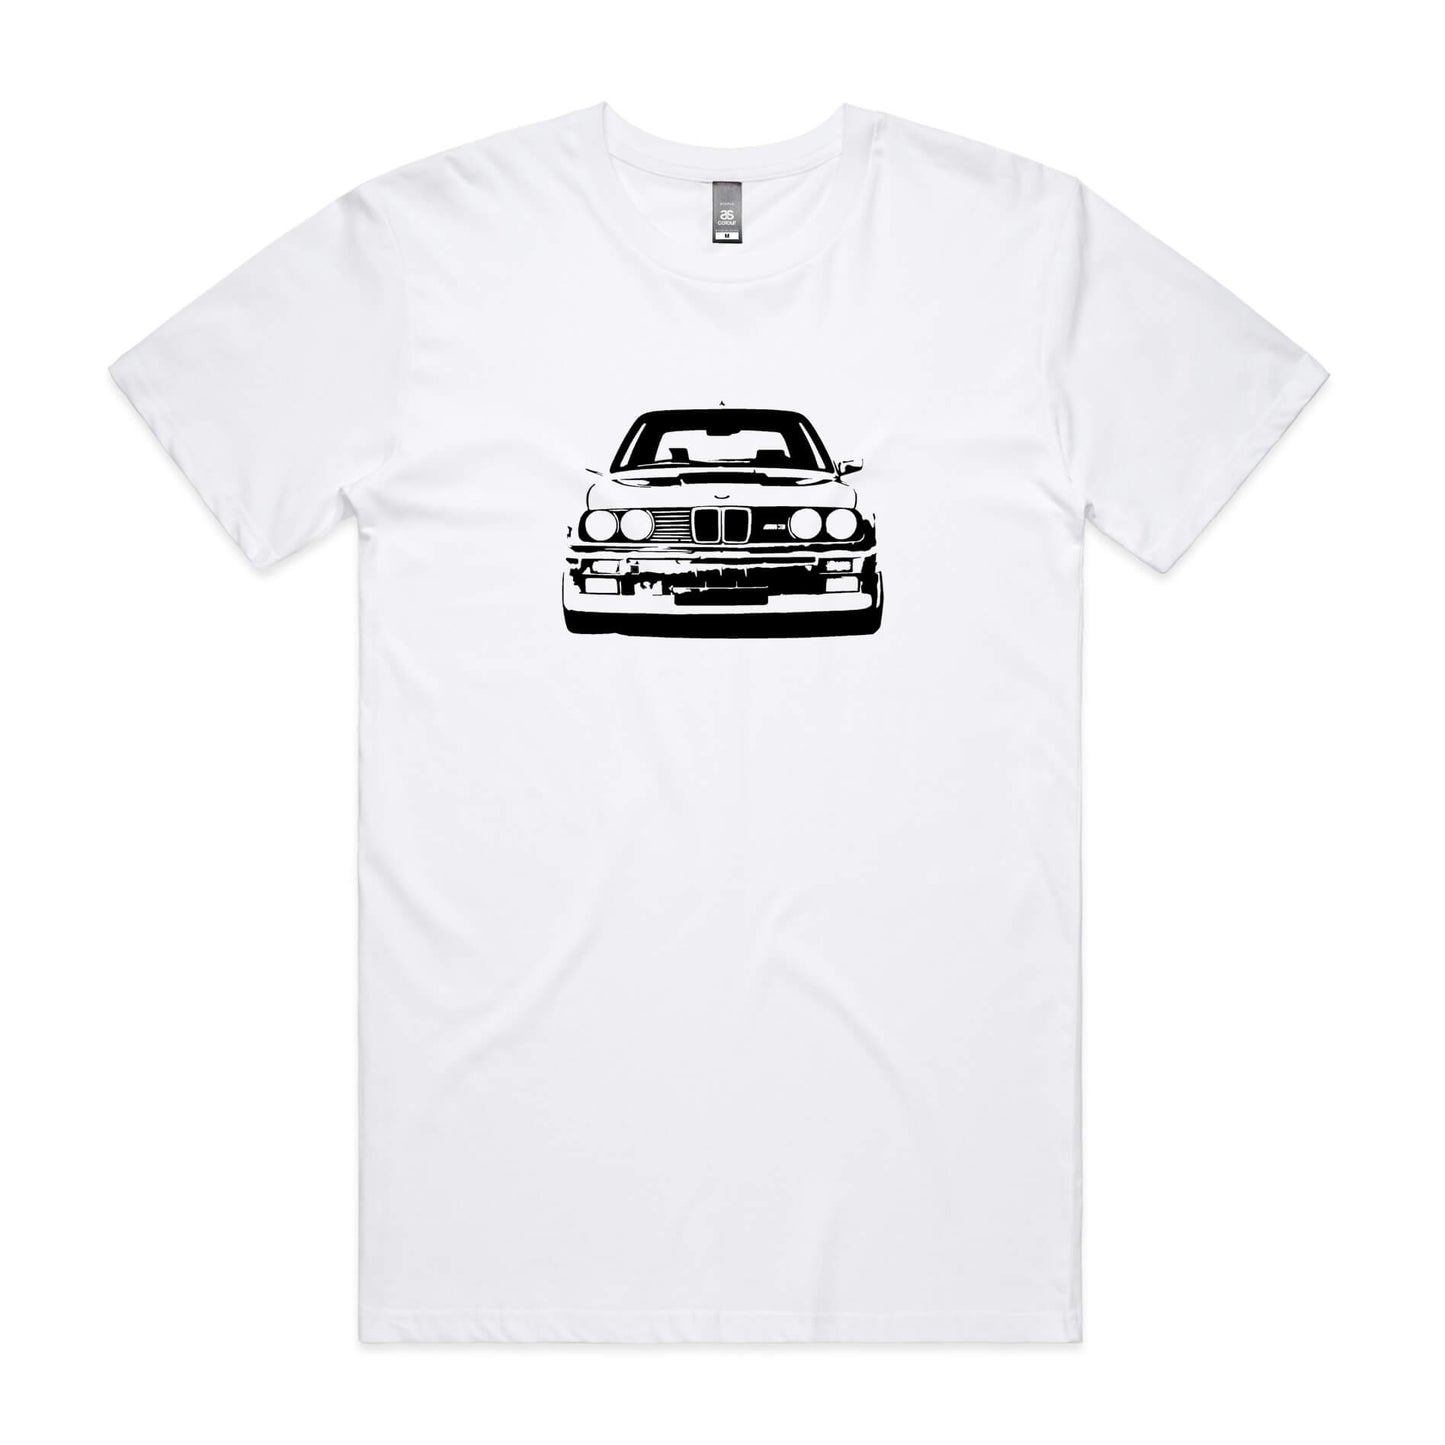 BMW E30 t-shirt with M3 car printed in black on a white shirt